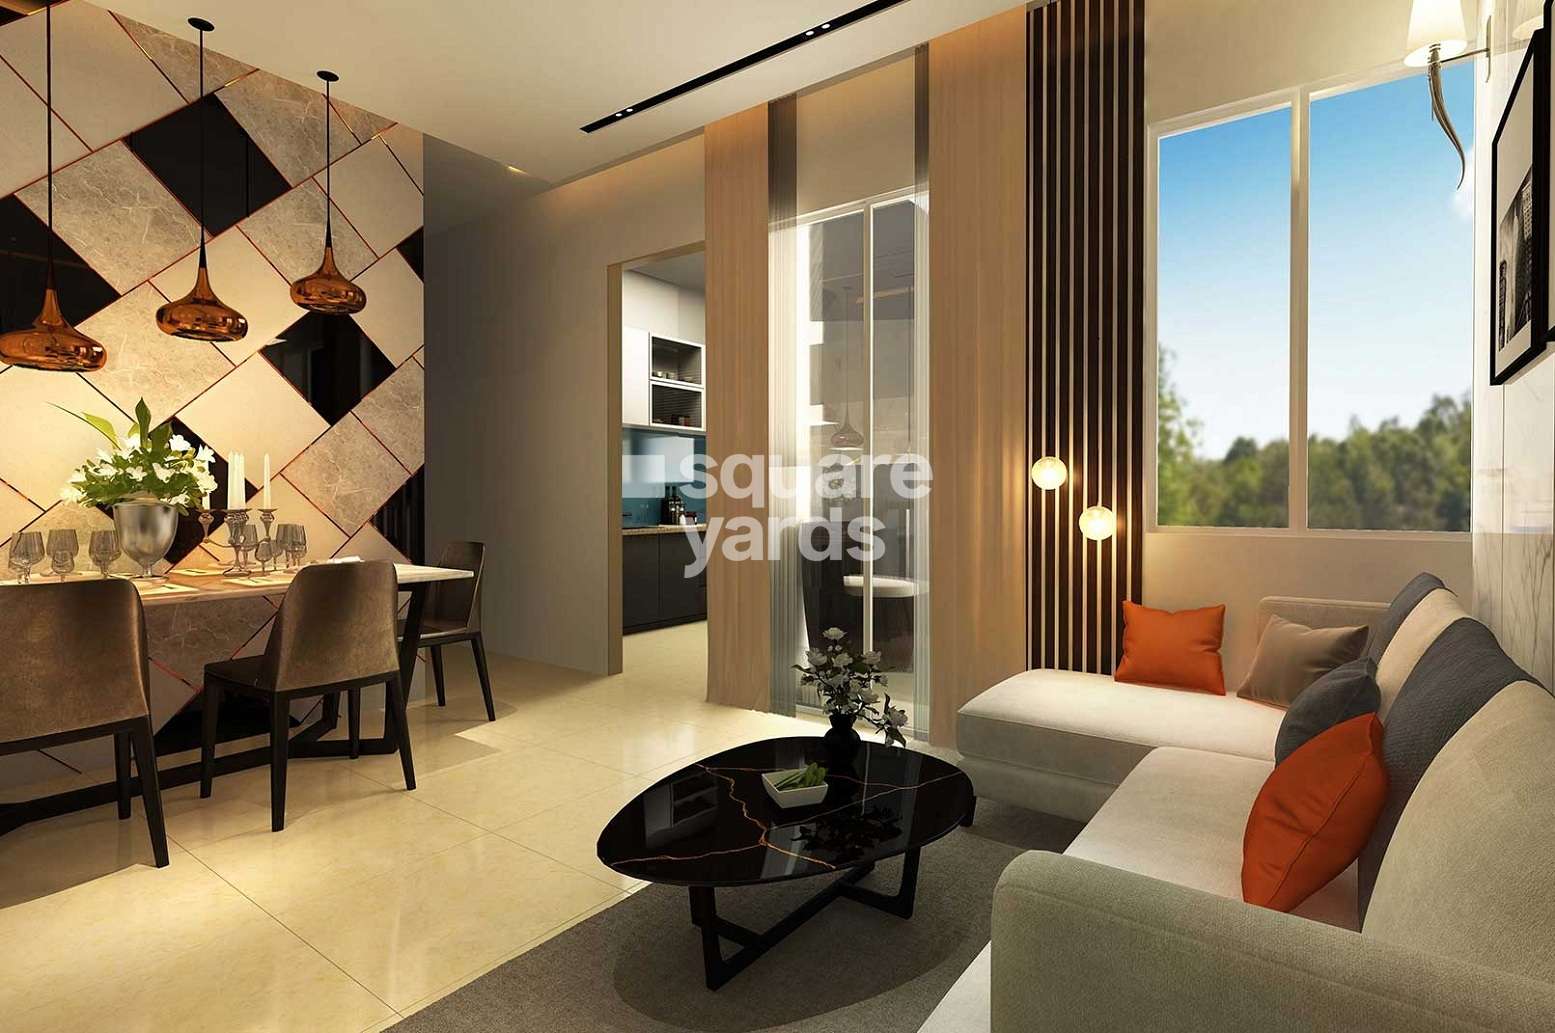 belmac riverside phase 3 a project apartment interiors3